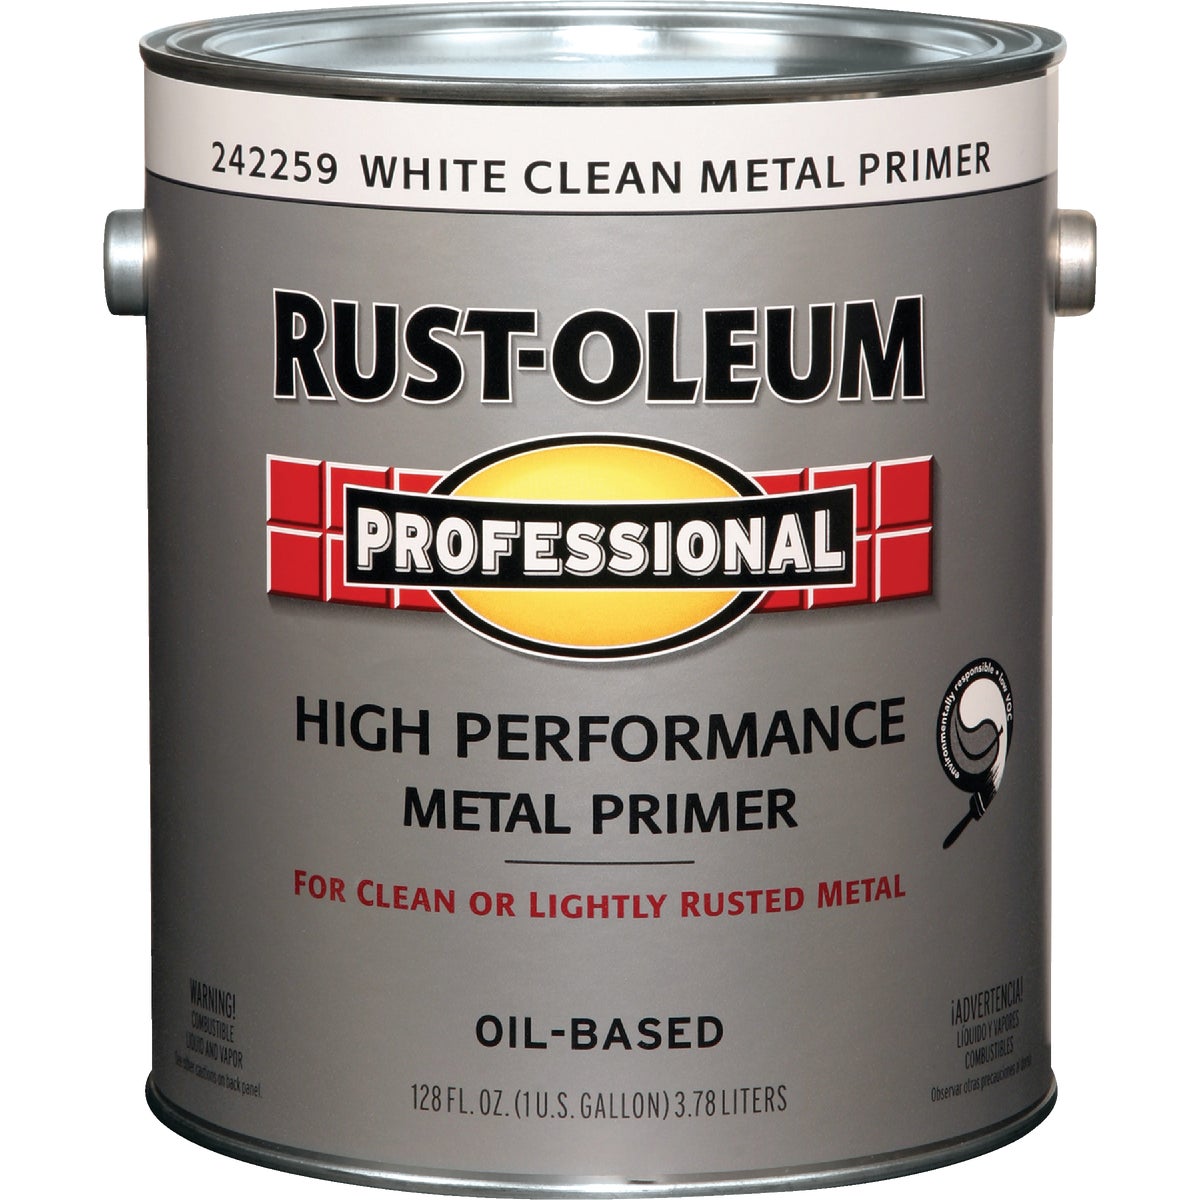 Item 786337, VOC for South Coast, California white clean metal primer for use on clean 